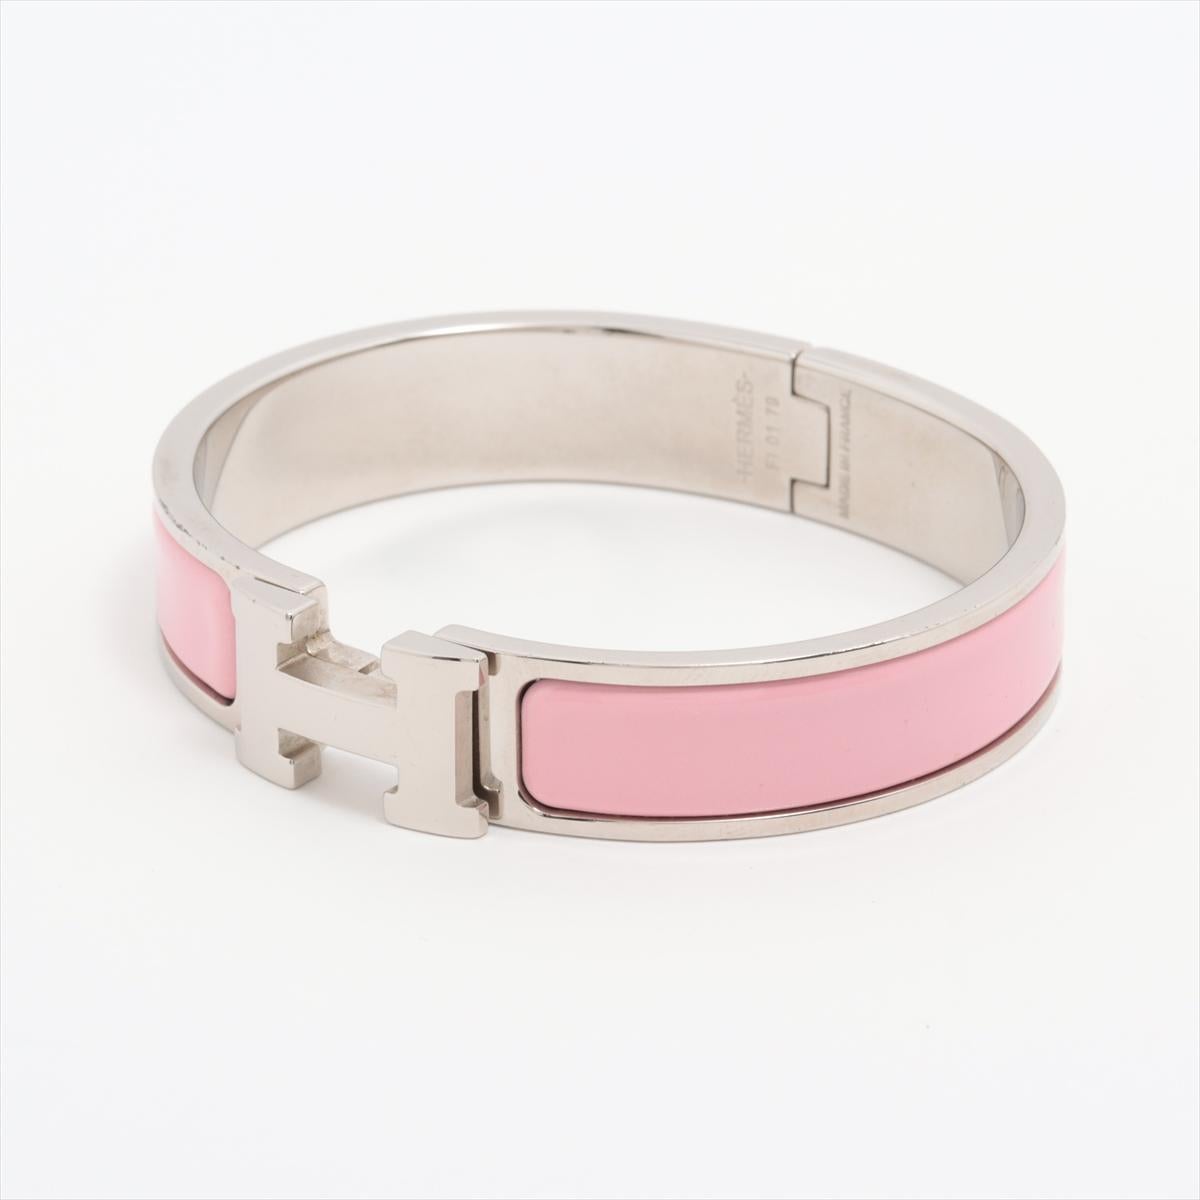 The Hermès H Bangle Clic Clac Bangle in Pink x Silver is a sophisticated and iconic accessory that exudes timeless elegance. Crafted from high-quality enamel and plated metal, the bangle features Hermès' signature H motif, making it instantly